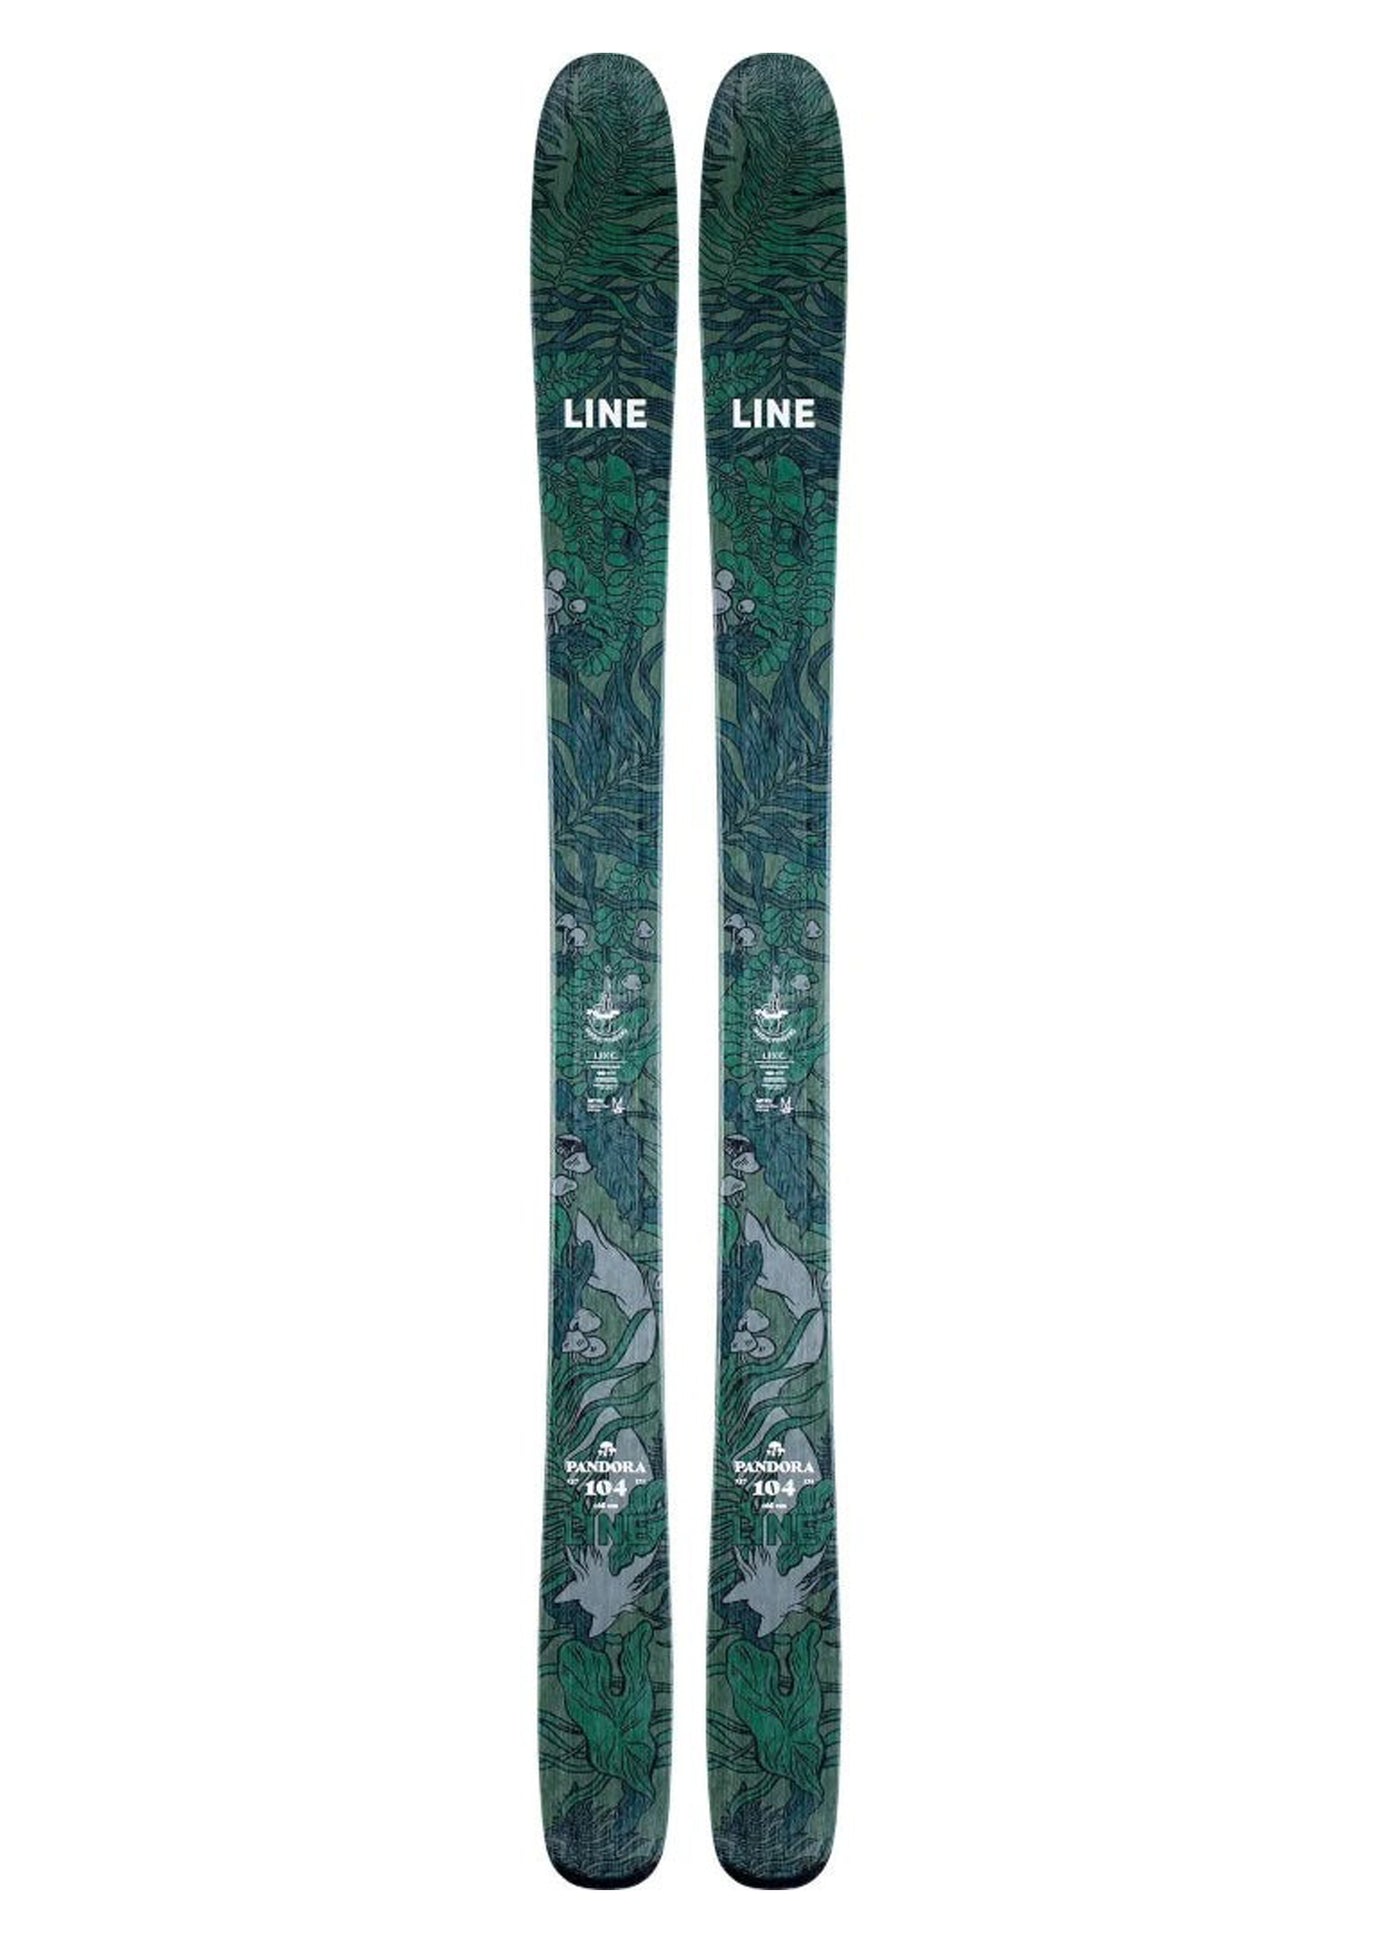 LINE Skis PANDORA 110, 170cm Skis, Includes Marker Squire 11 Bindings